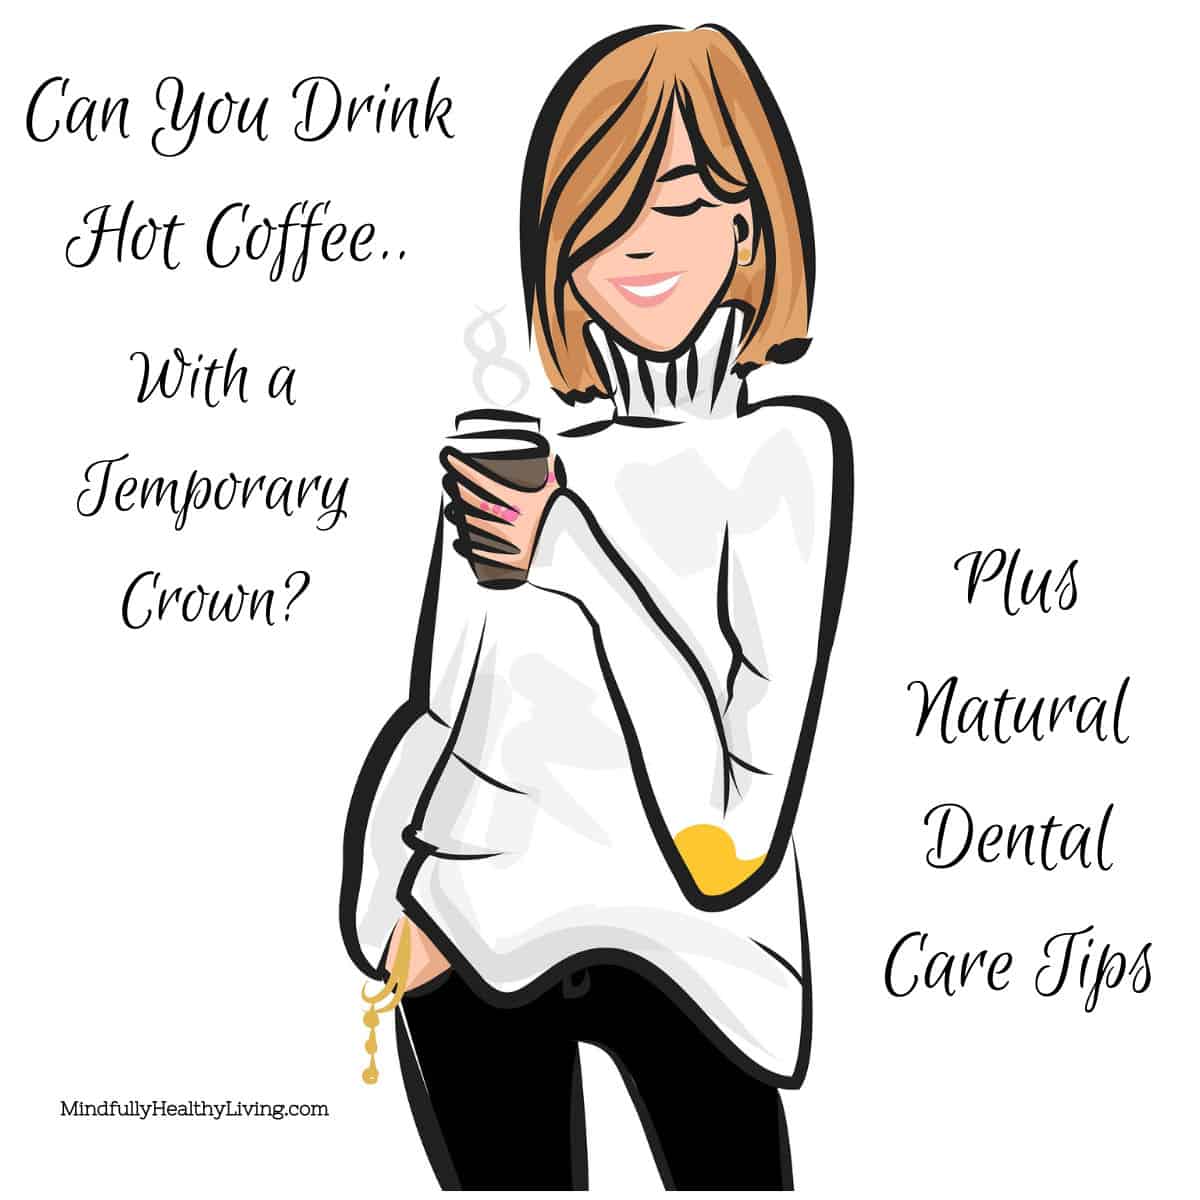 A cartoon light-skinned woman with short light brown hair and a smile with her eyes closed. She is wearing a white turtle neck with a yellow spot on her elbow while holding a brown cup of coffee. her other hand is in her pocked and has two golden bangle bracelets. her pants are black. Black text on a white background says Can You Drink Hot Coffee.. With a Temporary Crown? on the left with Mindfullyhealthyliving.com in tiny print at the bottom left. On the right it reads, " Plus Natural Dental Care Tips"